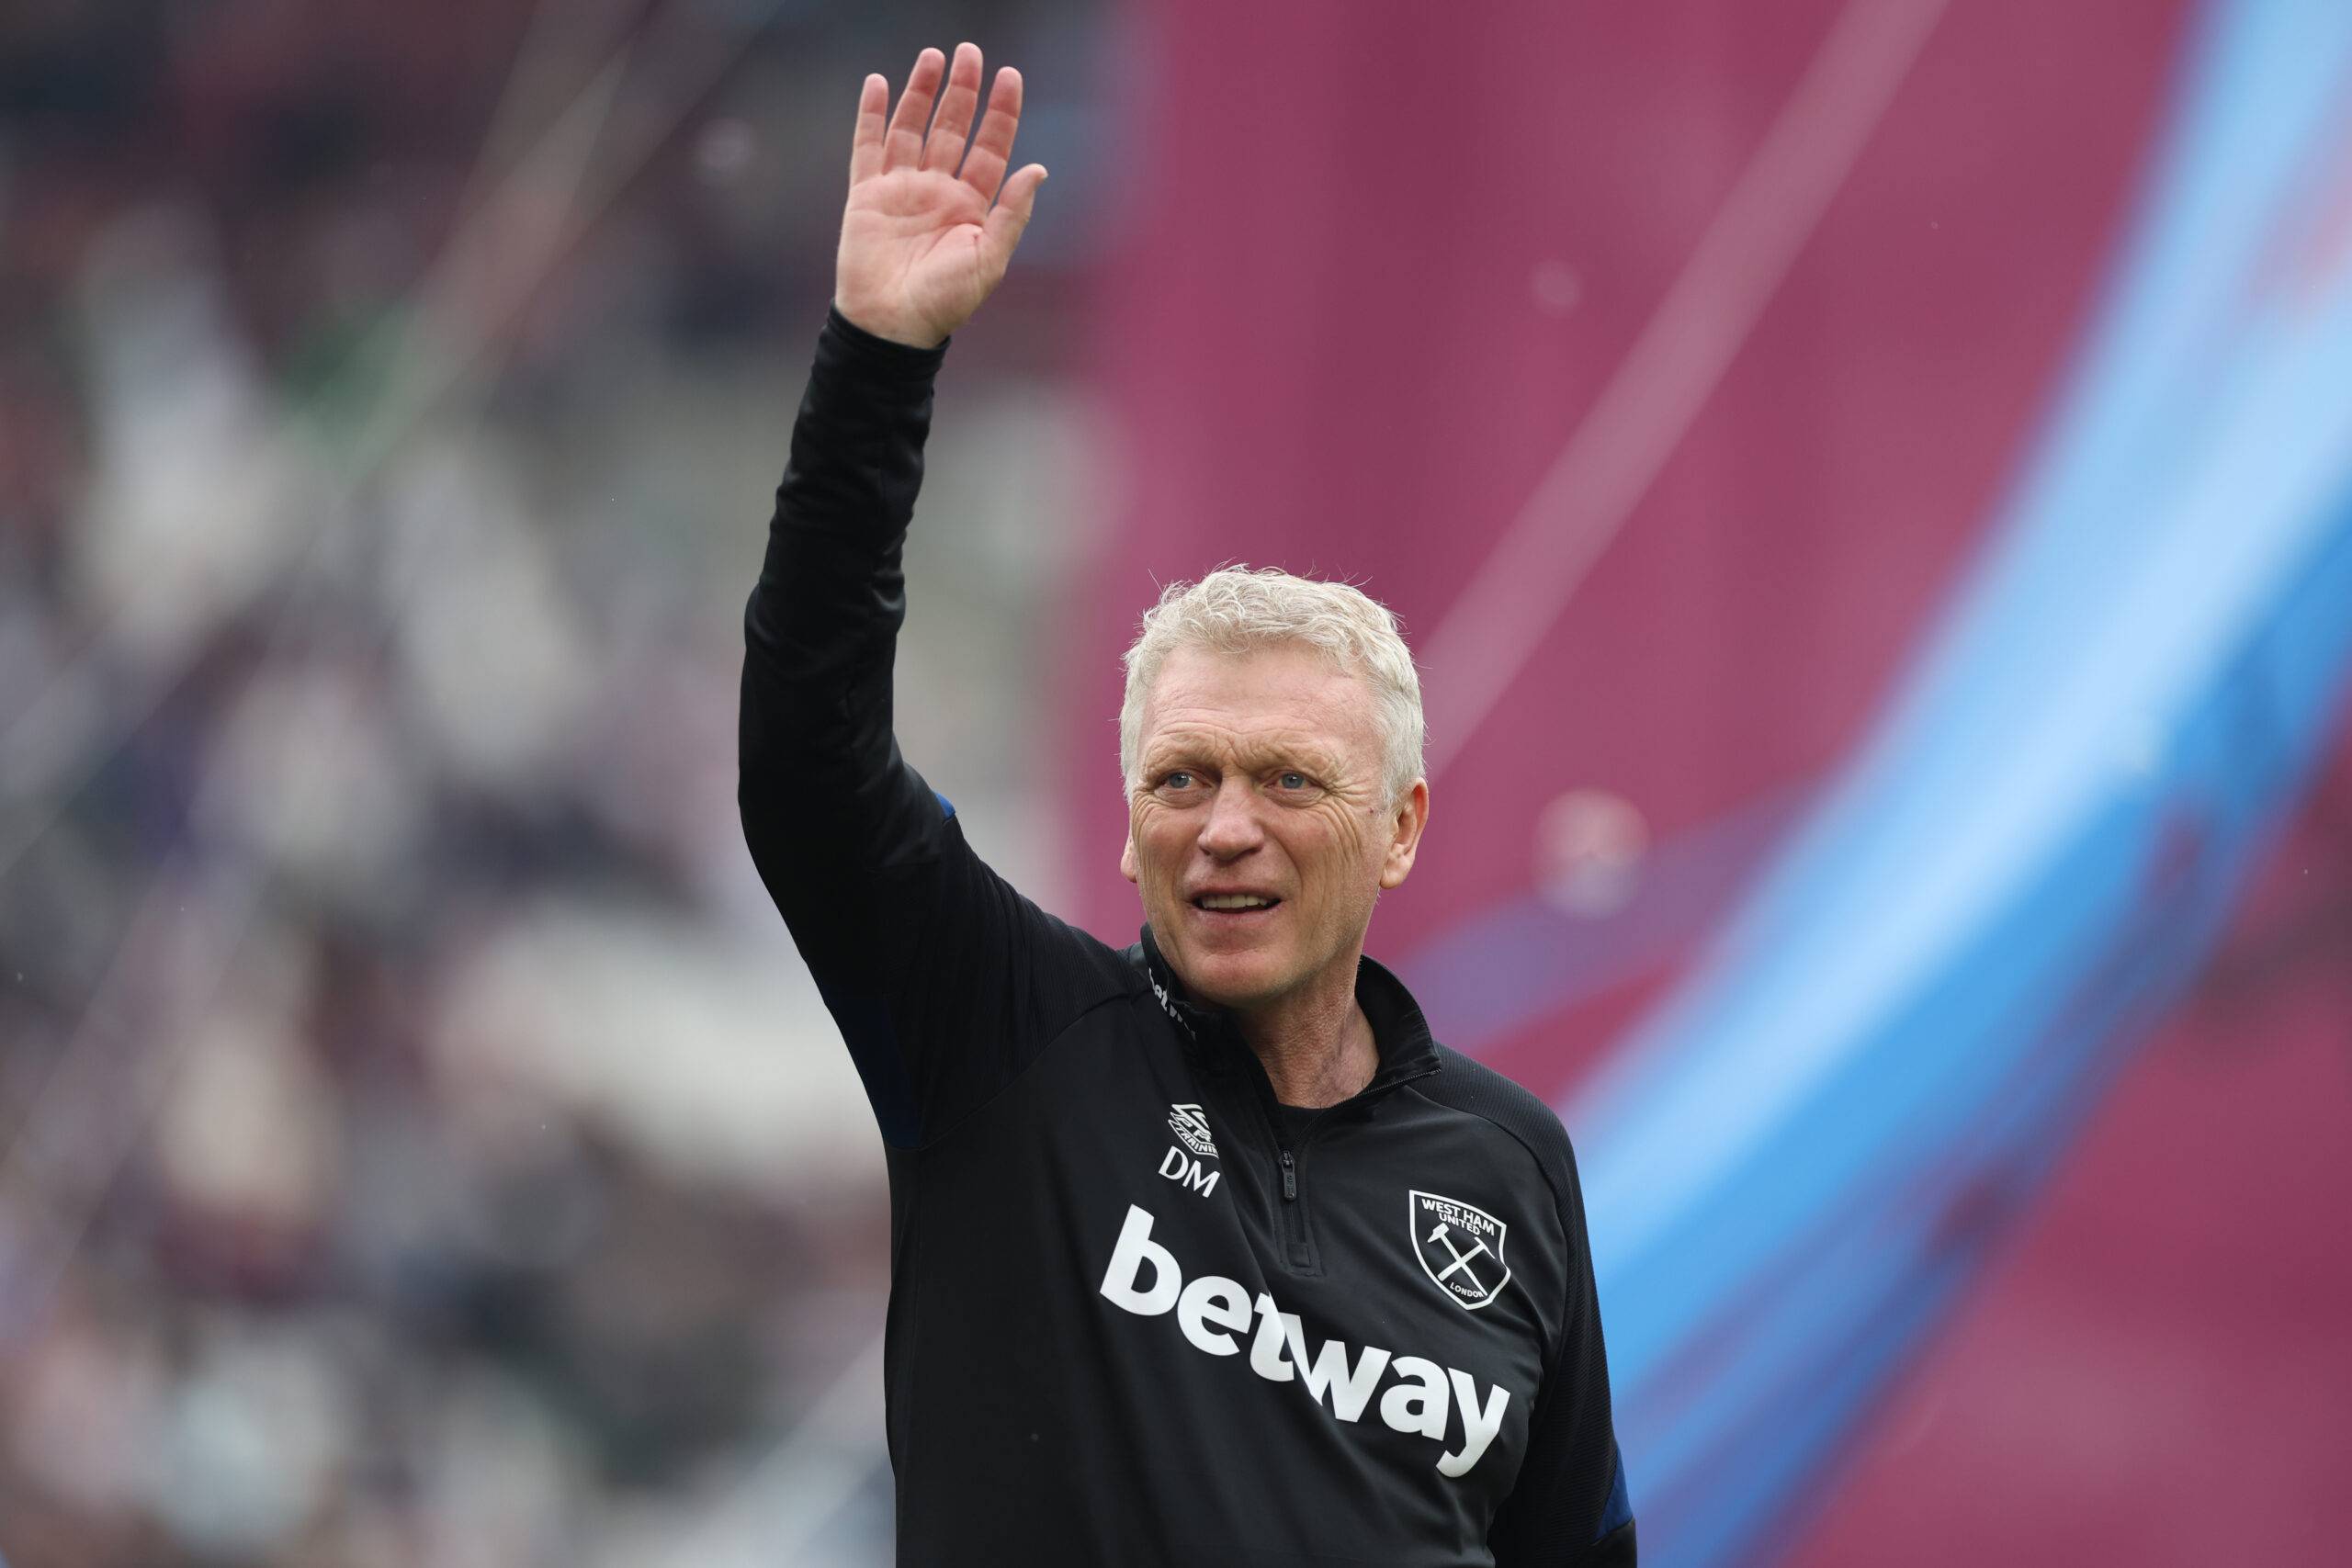 West Ham manager David Moyes waving at the crowd